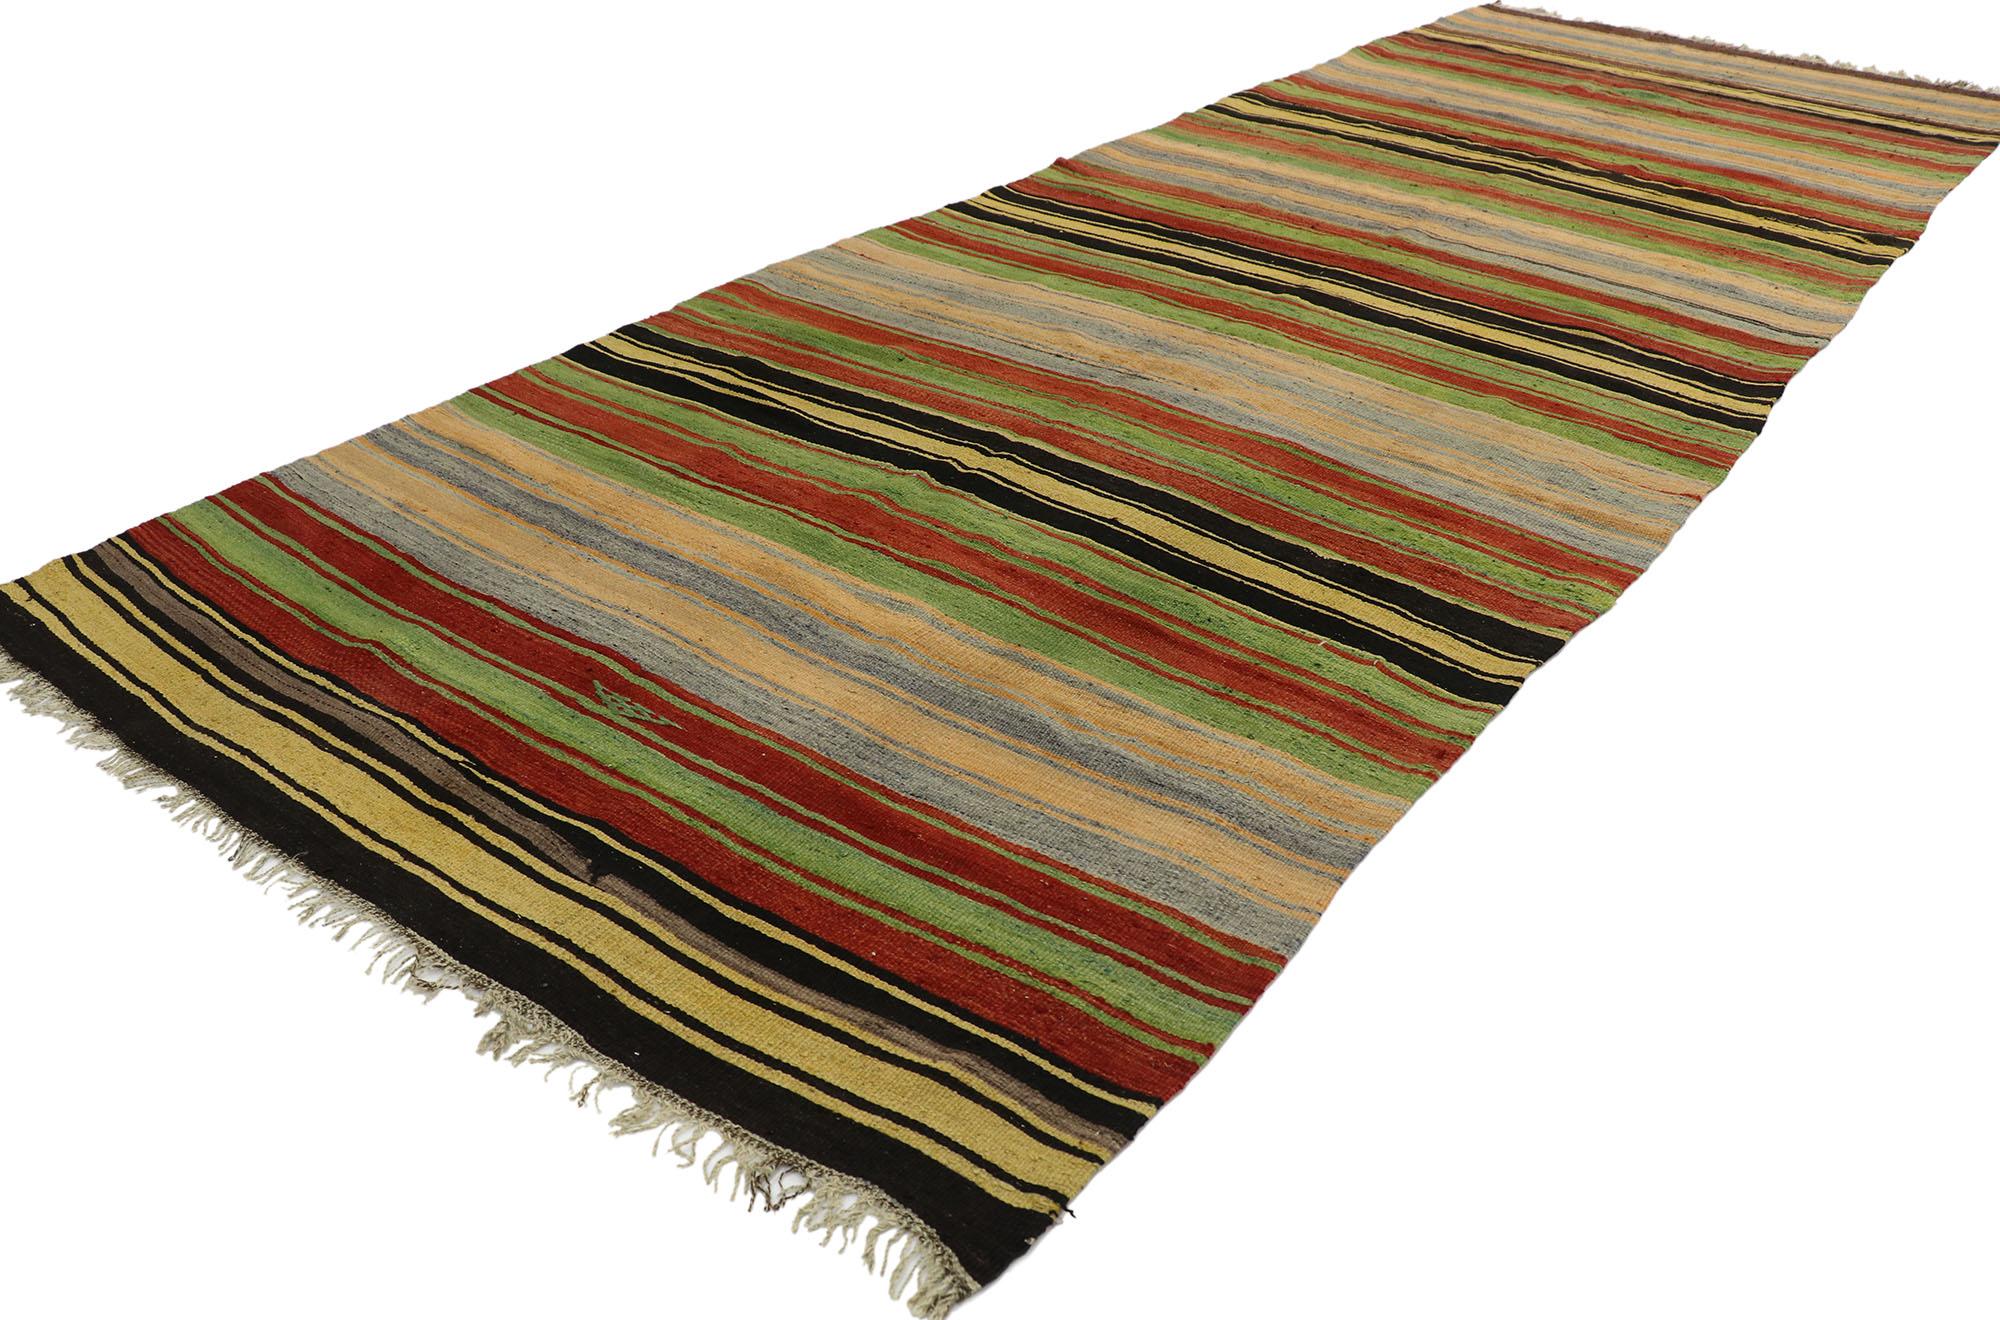 53133, vintage Turkish Striped Kilim rug with modern Cabin style. With its warm hues and rugged beauty, this hand-woven wool striped kilim rug manages to meld contemporary, modern, and traditional design elements. The flat-weave kilim rug features a